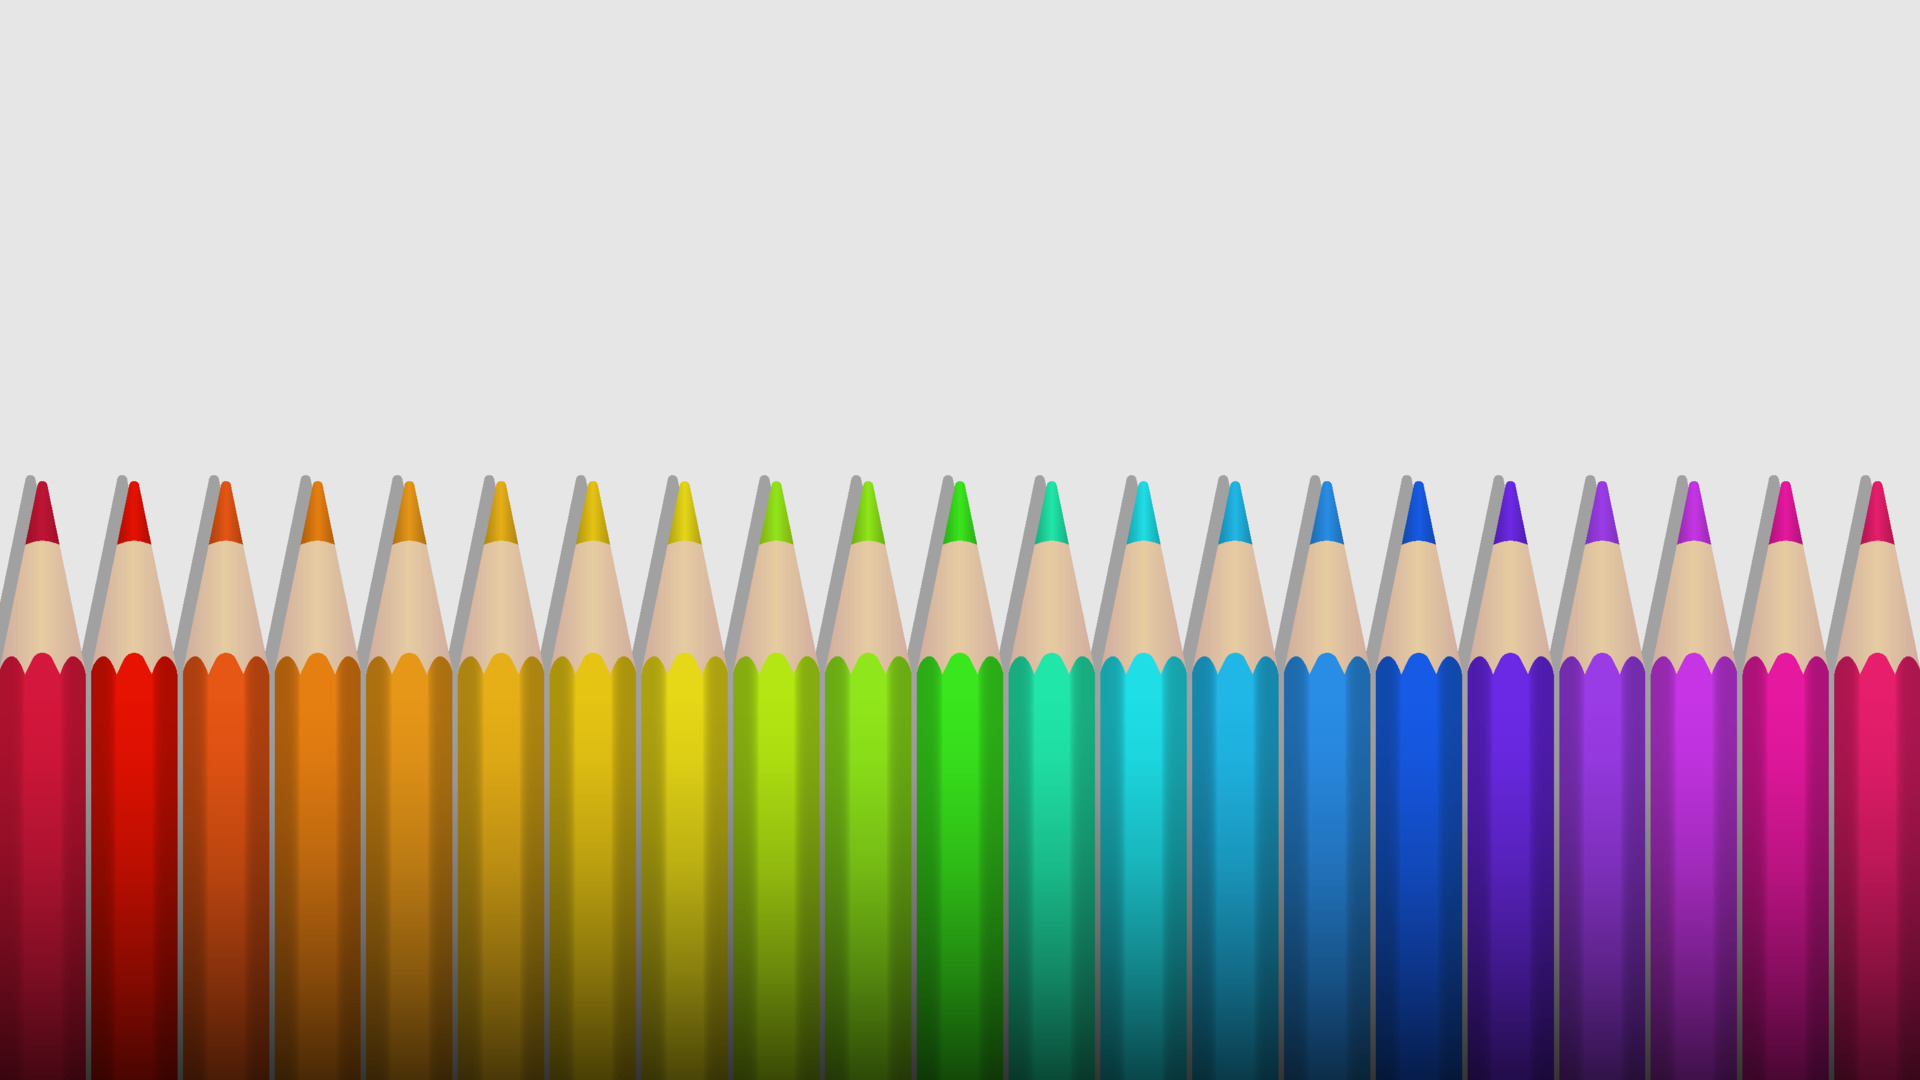 Rainbow colored pencils lie in a row on a white background